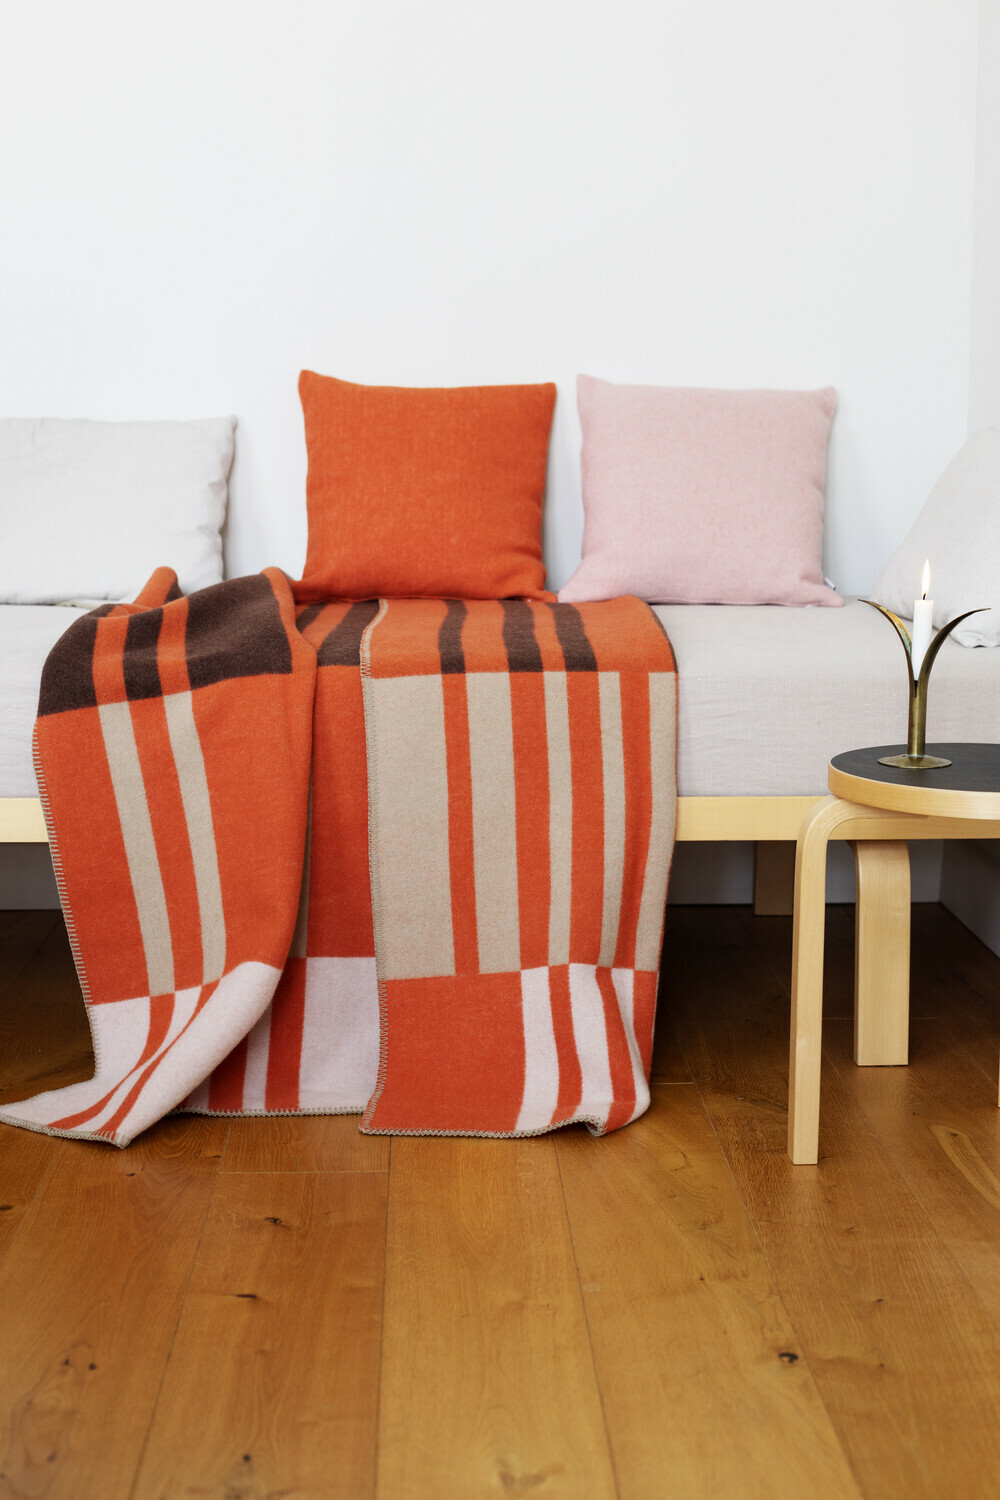 https://www.lapuankankurit.fi/sites/default/files/styles/extra_large/public/images/products/lapuankankurit_toffee_blanket_brown-orange_and_tupla_cushion_covers.jpg?itok=ZhahmOmA